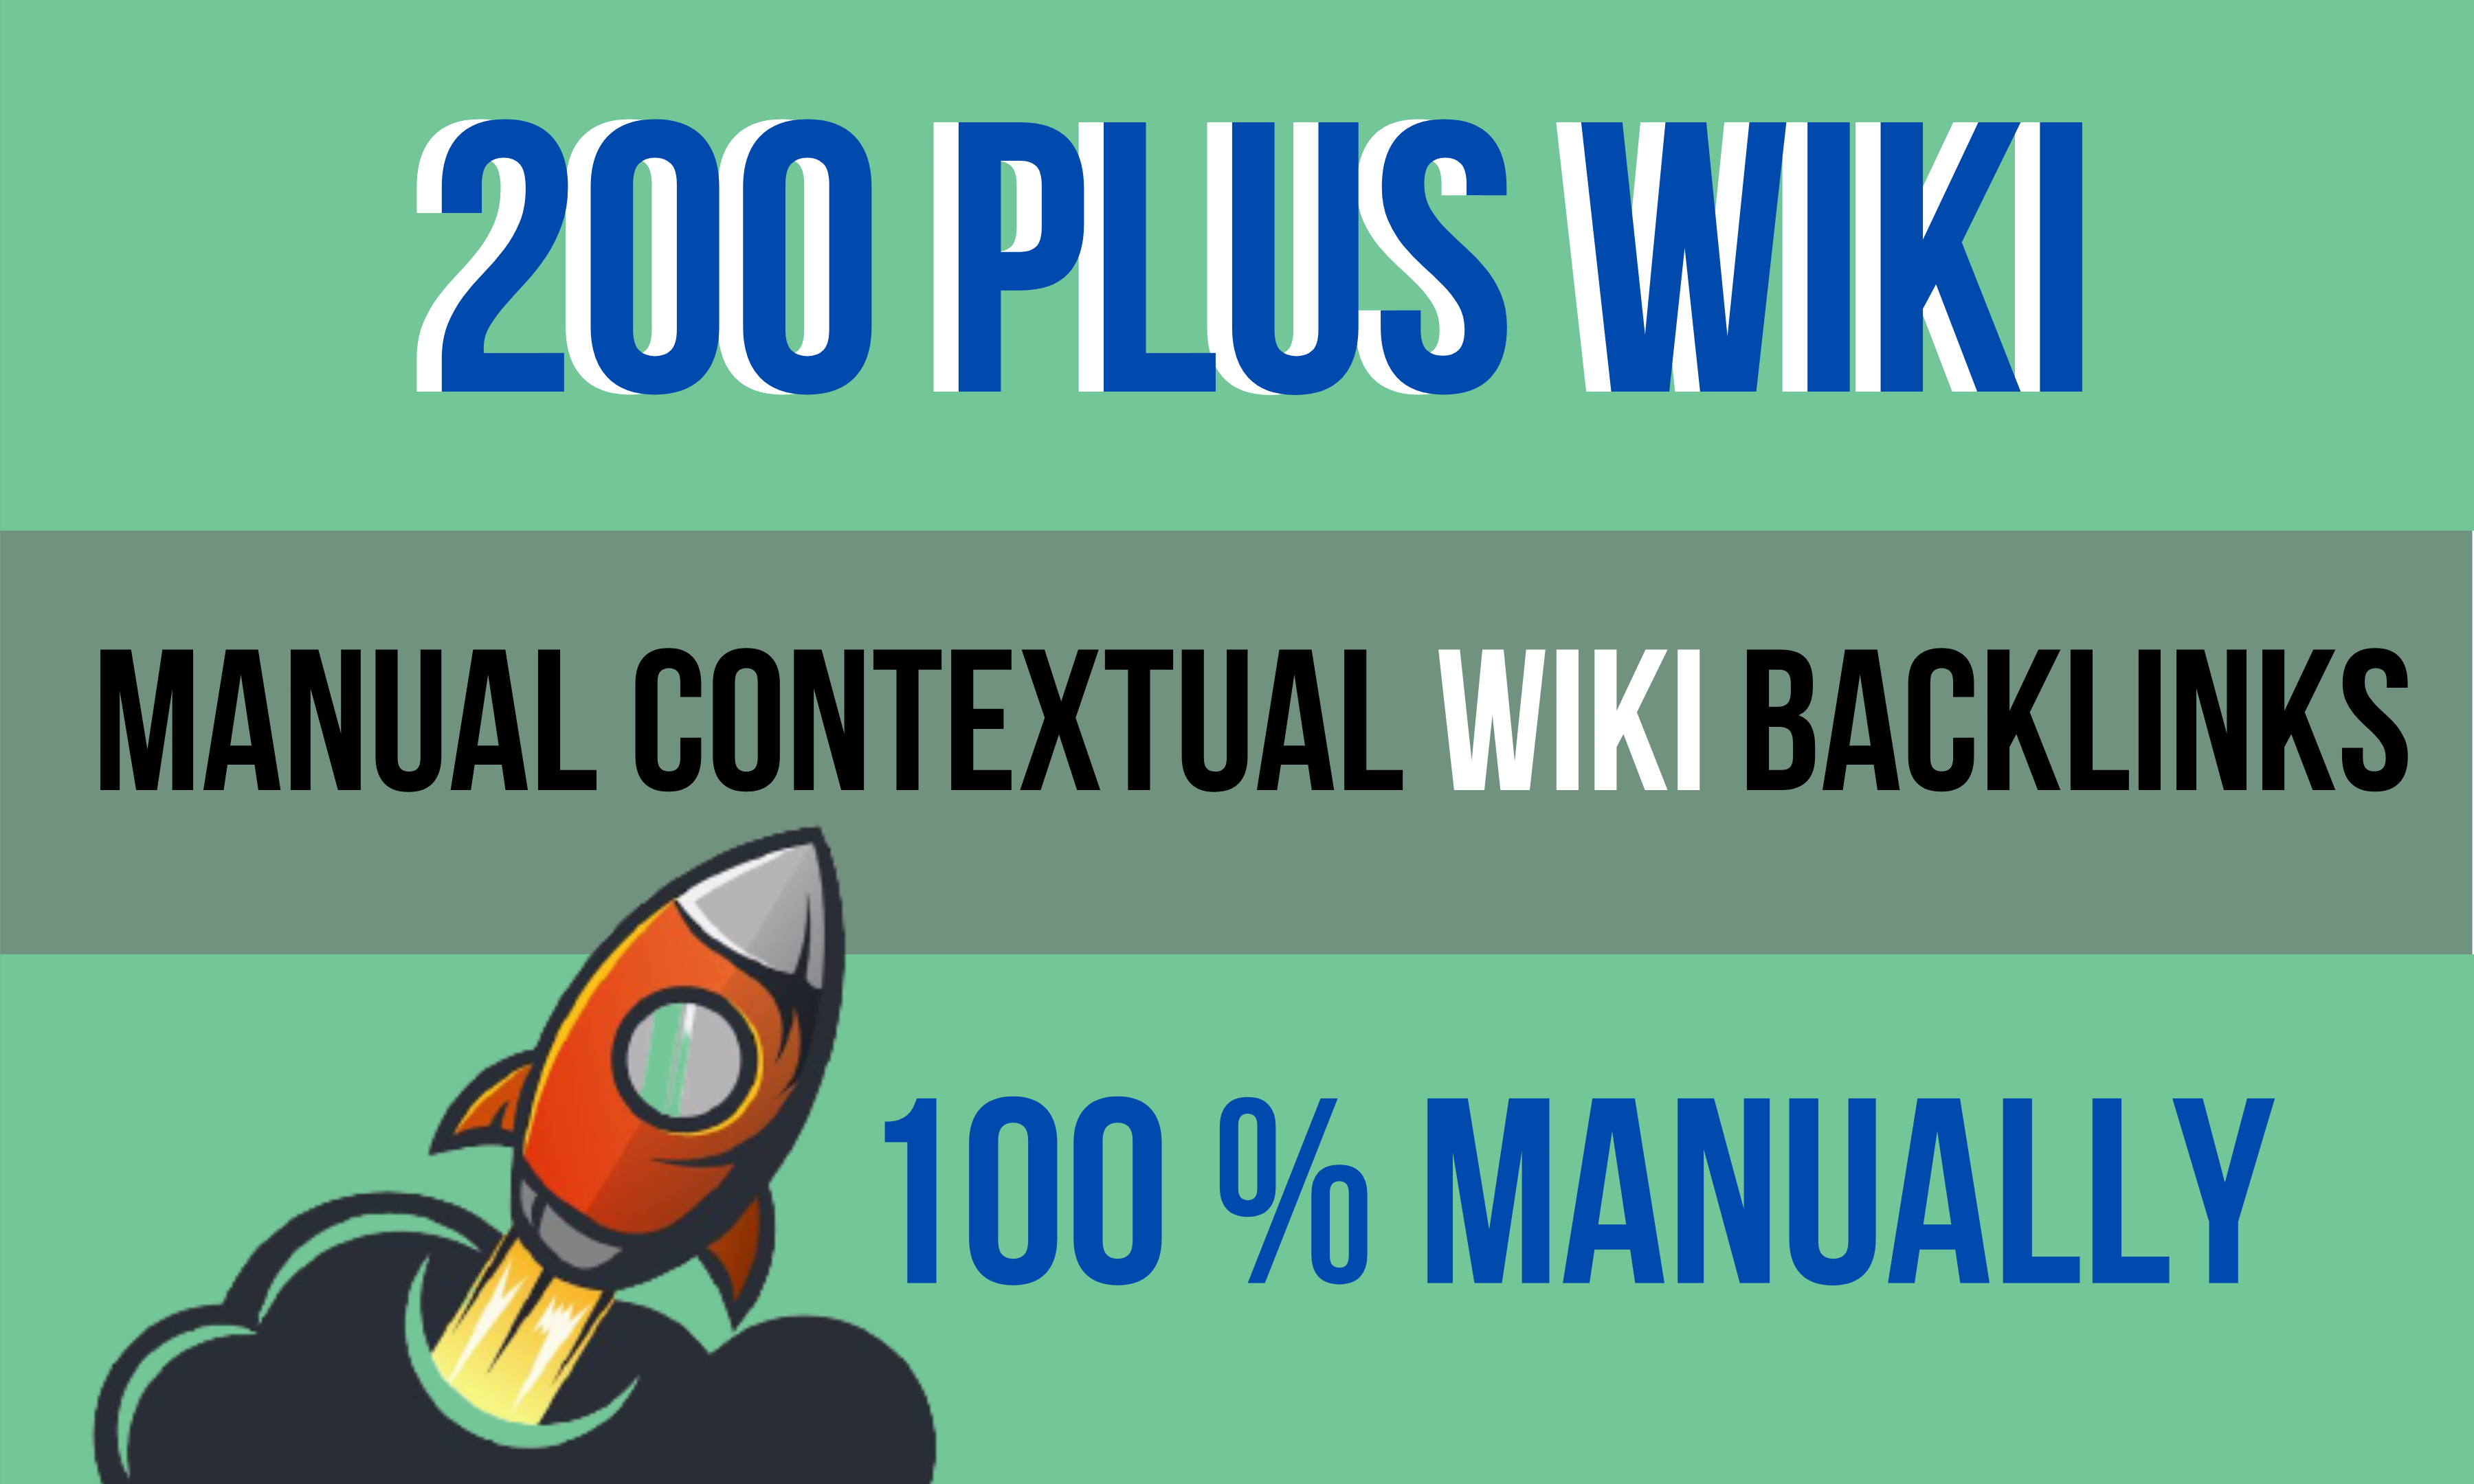 I will create 200 plus manual contextual wiki backlinks for fast ranking